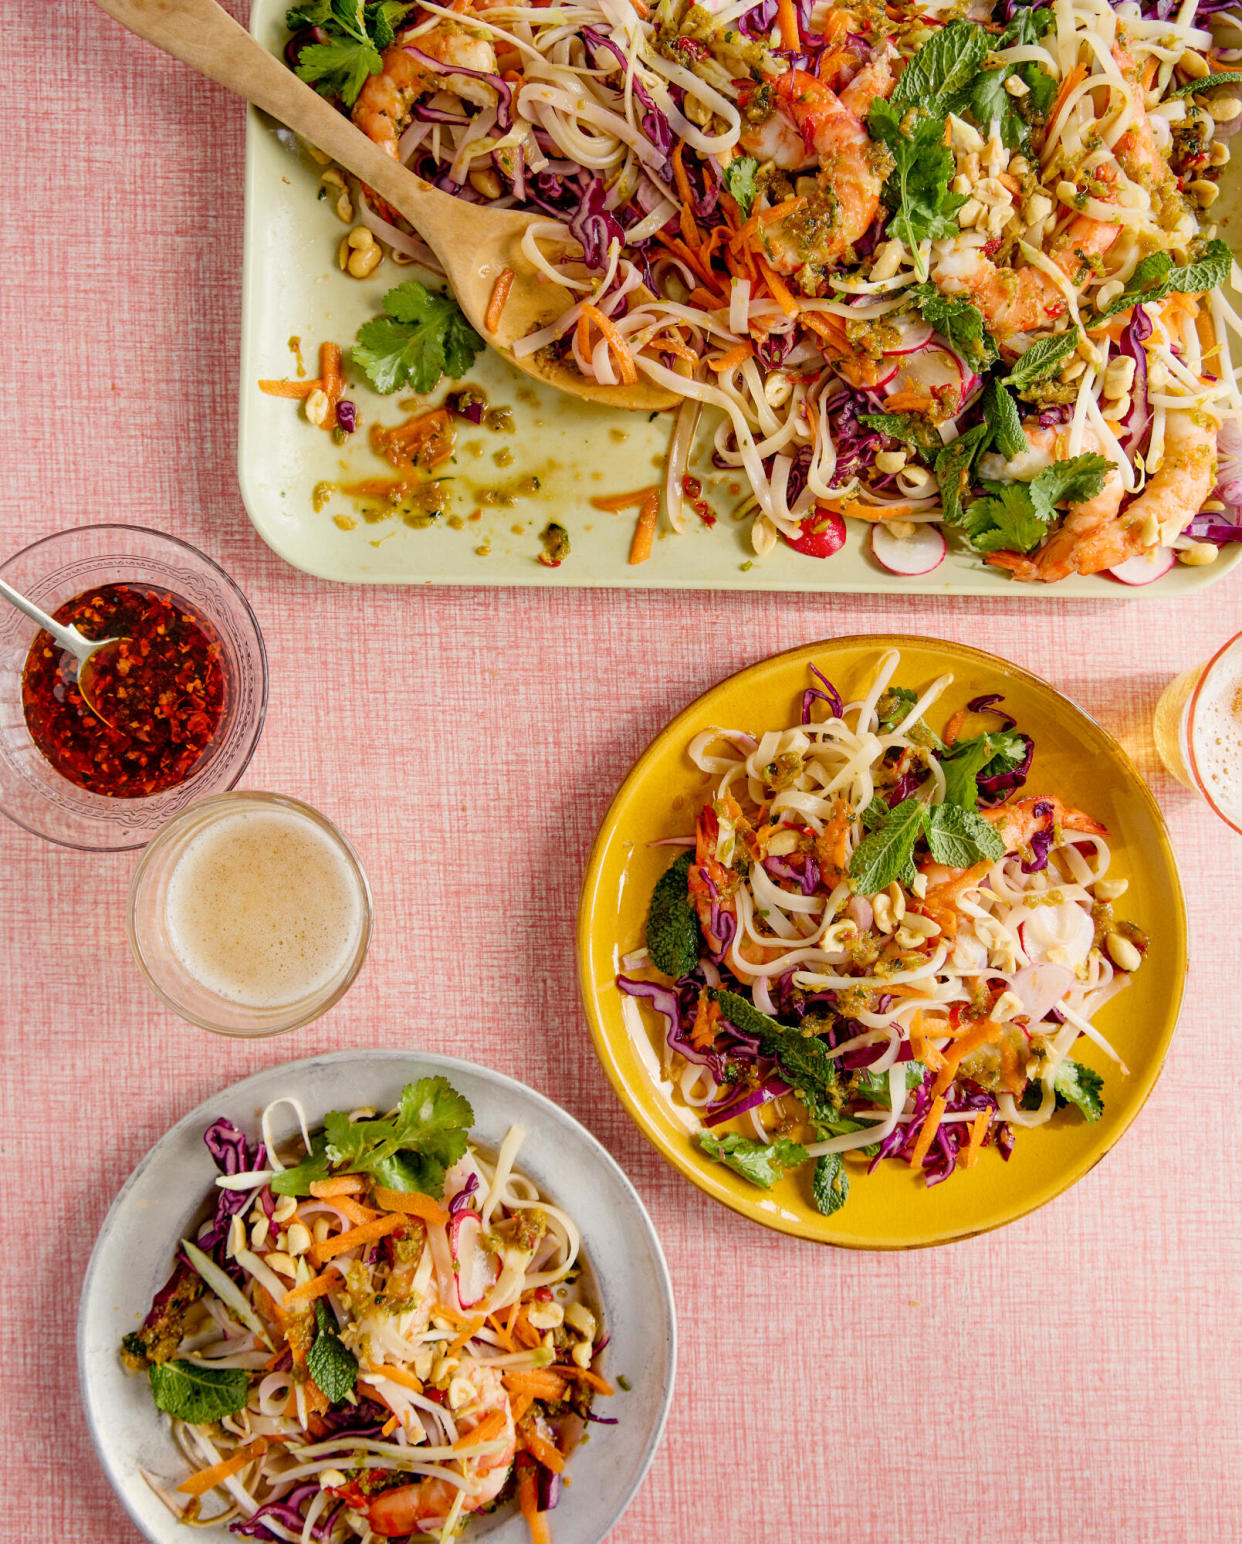 <span>Thomasina Miers’ cold noodle salad with herbs, mango, peanuts and prawns.</span><span>Photograph: Kim Lightbody/The Guardian. Food styling: Hanna Miller. Prop styling: Louie Waller.</span>